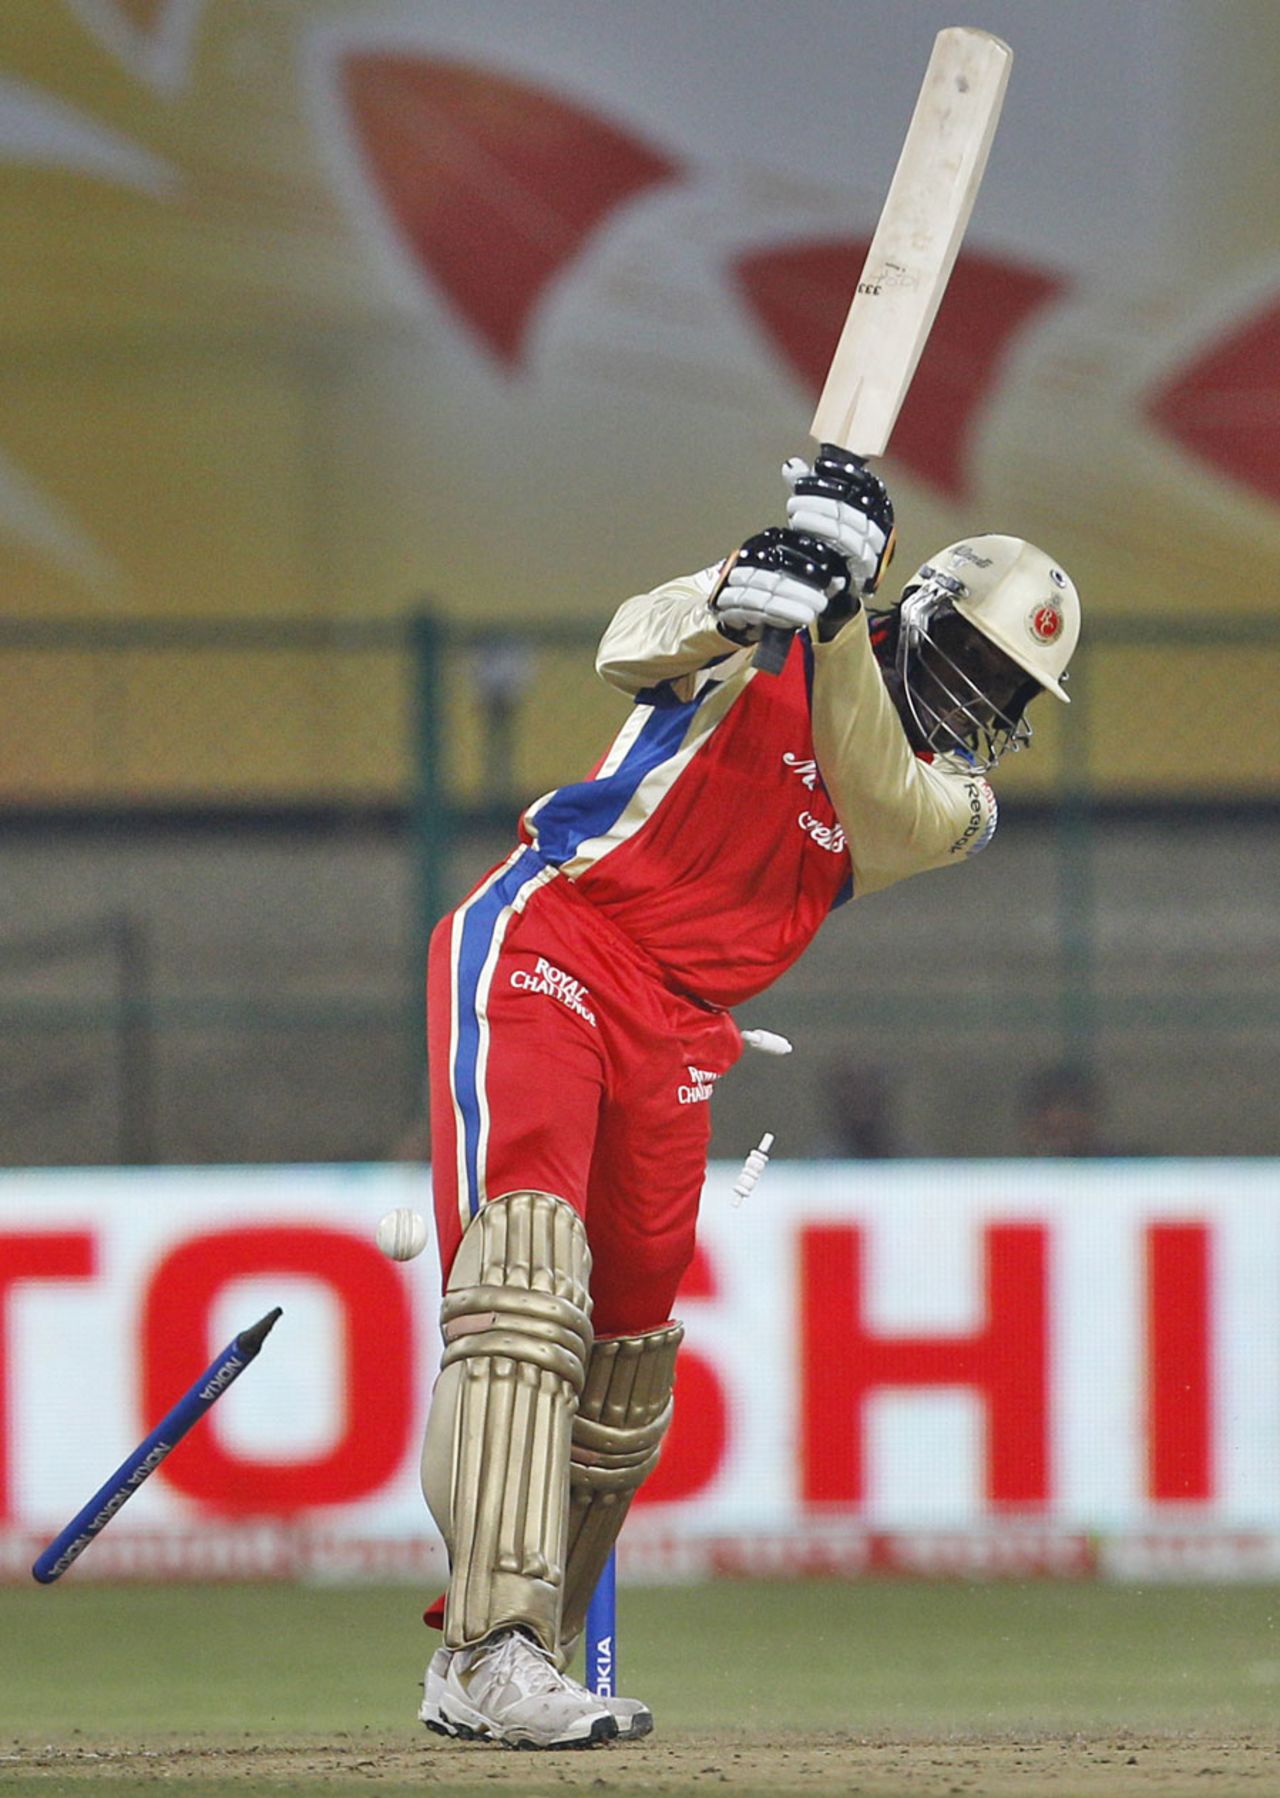 Chris Gayle has his stumps knocked out of the ground, Royal Challengers Bangalore v Kolkata Knight Riders, Champions League Twenty20, Bangalore, September 29, 2011